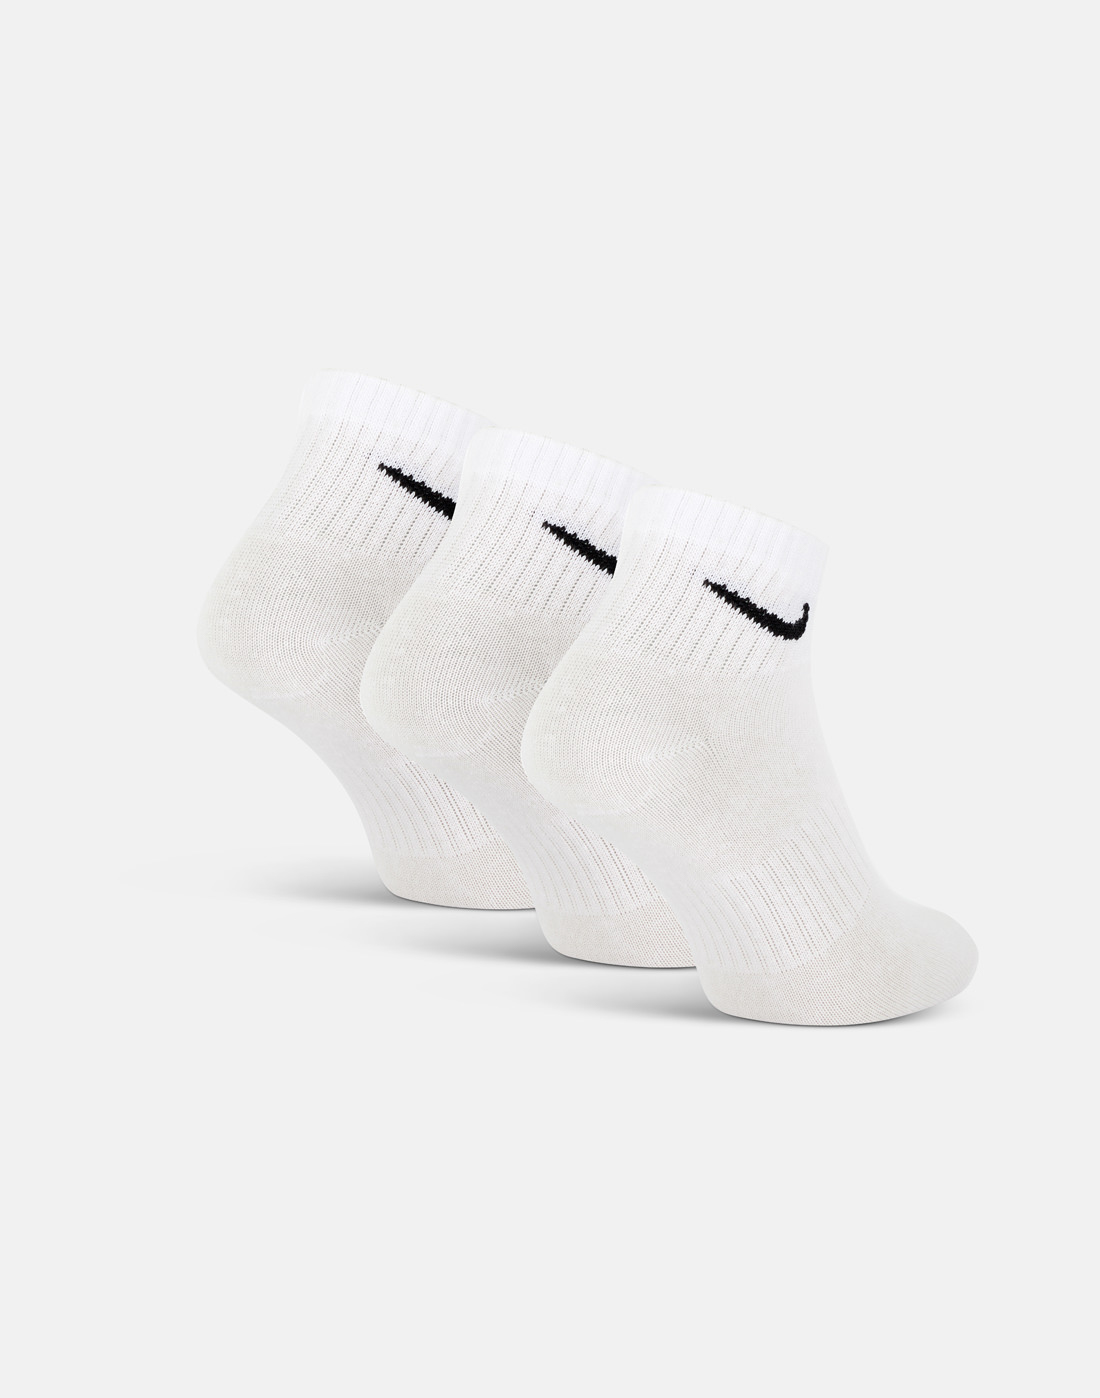 Nike Everyday Ankle 3 Pack Socks - White | Life Style Sports IE